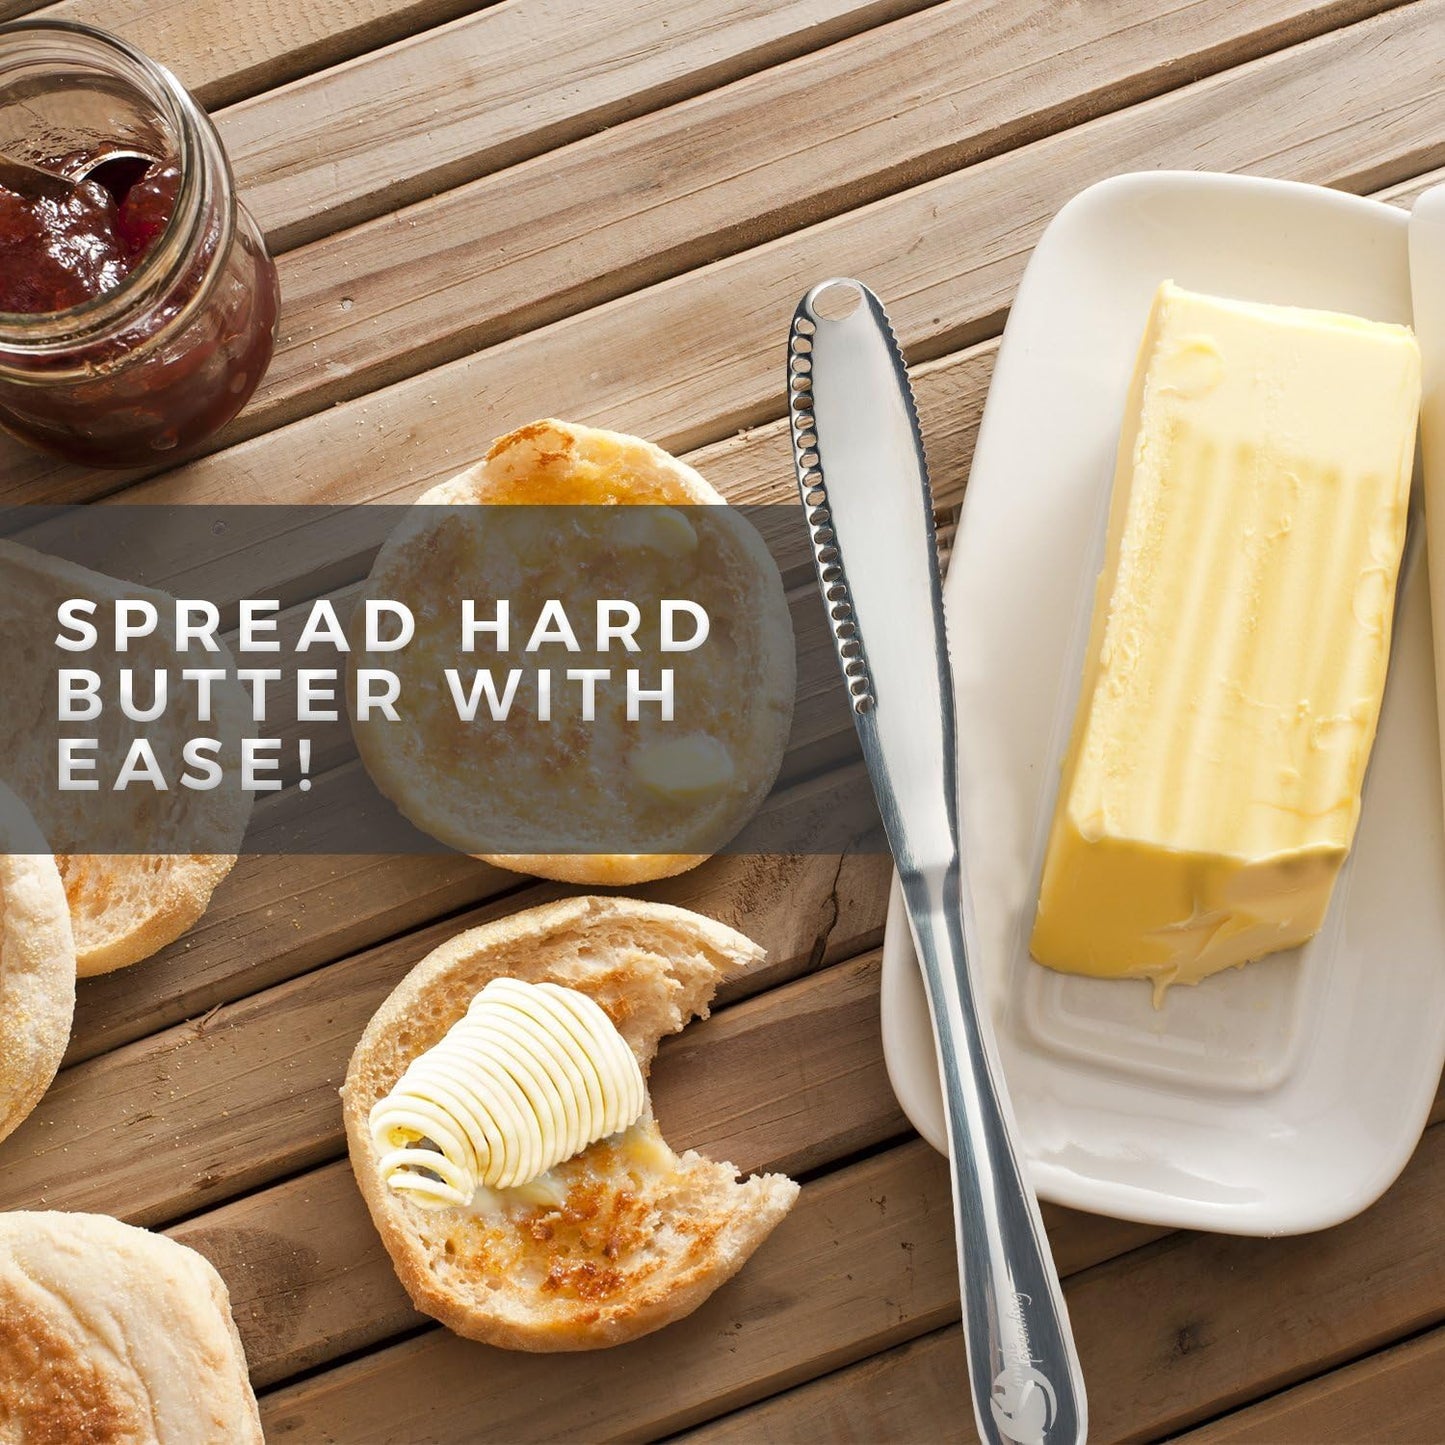 A butter curling knife is resting next to some butter and toasted muffins.